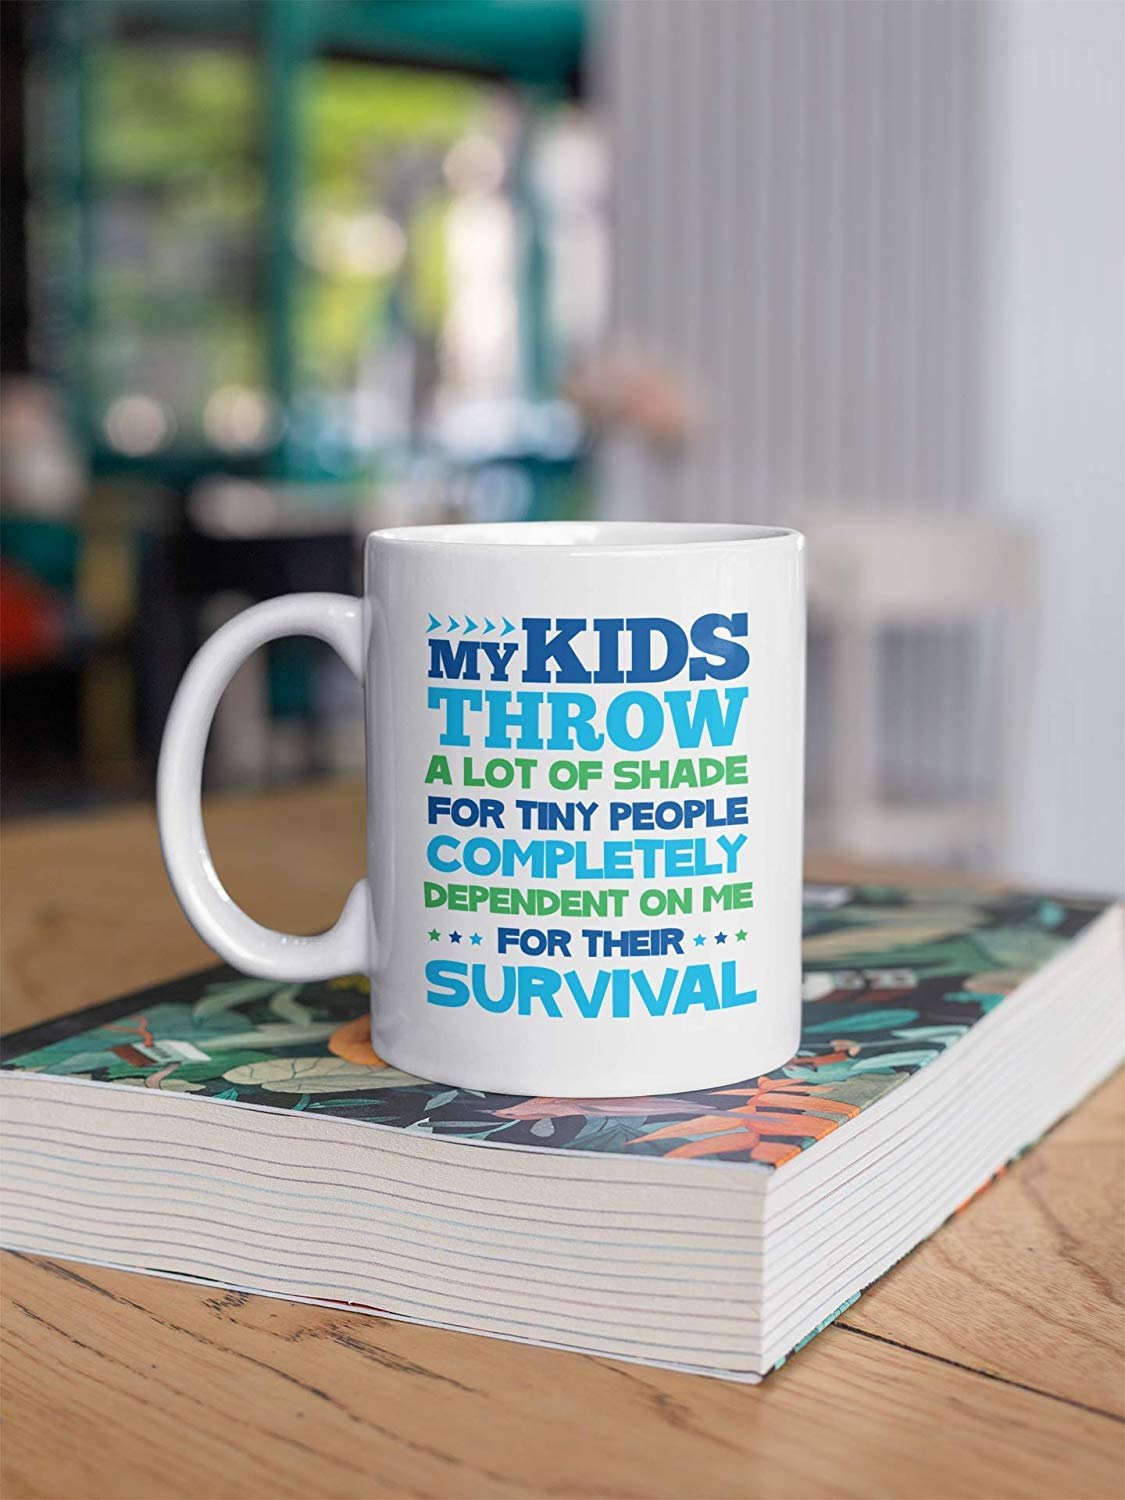 My Kids Throw A Lot Of Shade. Funny Coffee & Tea Mug For Mom, Dad, Mother, Father, Mama, Papa, Step Mom, Step Dad, Auntie, Uncle, Brother, Sister, Women And Men (11oz) - image 3 of 4